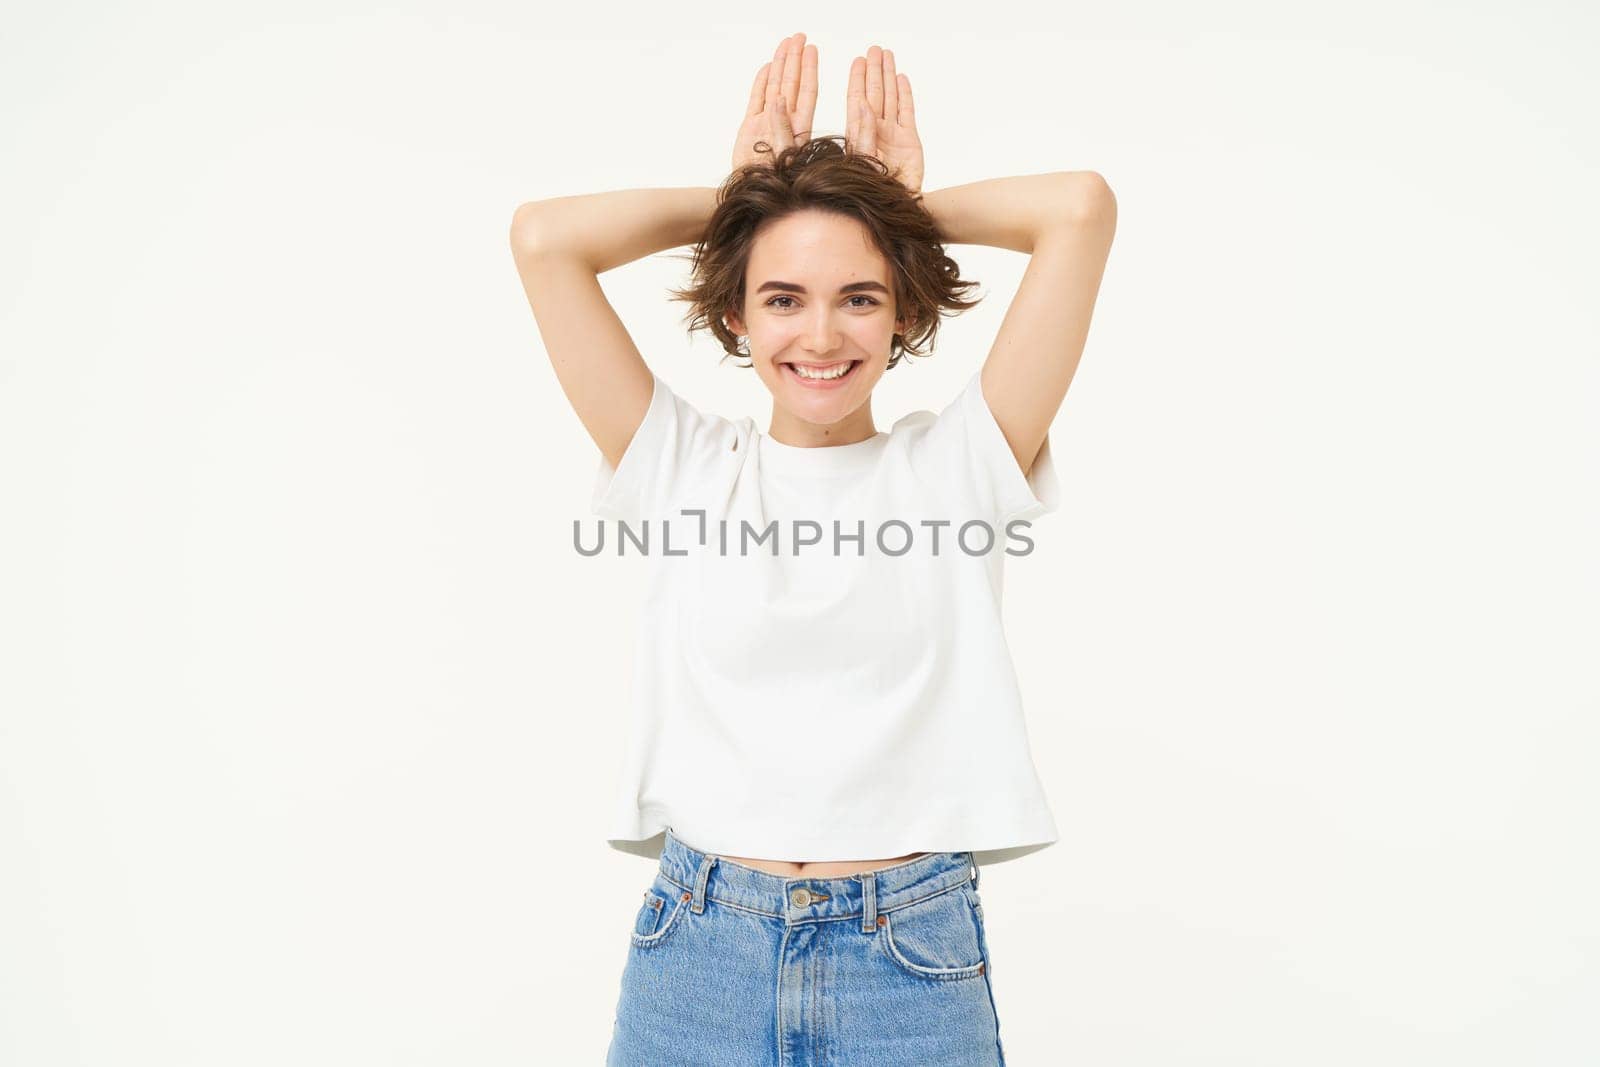 Portrait of funny and cute young woman with bunny ears gesture, holding palms on top of her head, smiling and looking happy at camera, standing over white background.